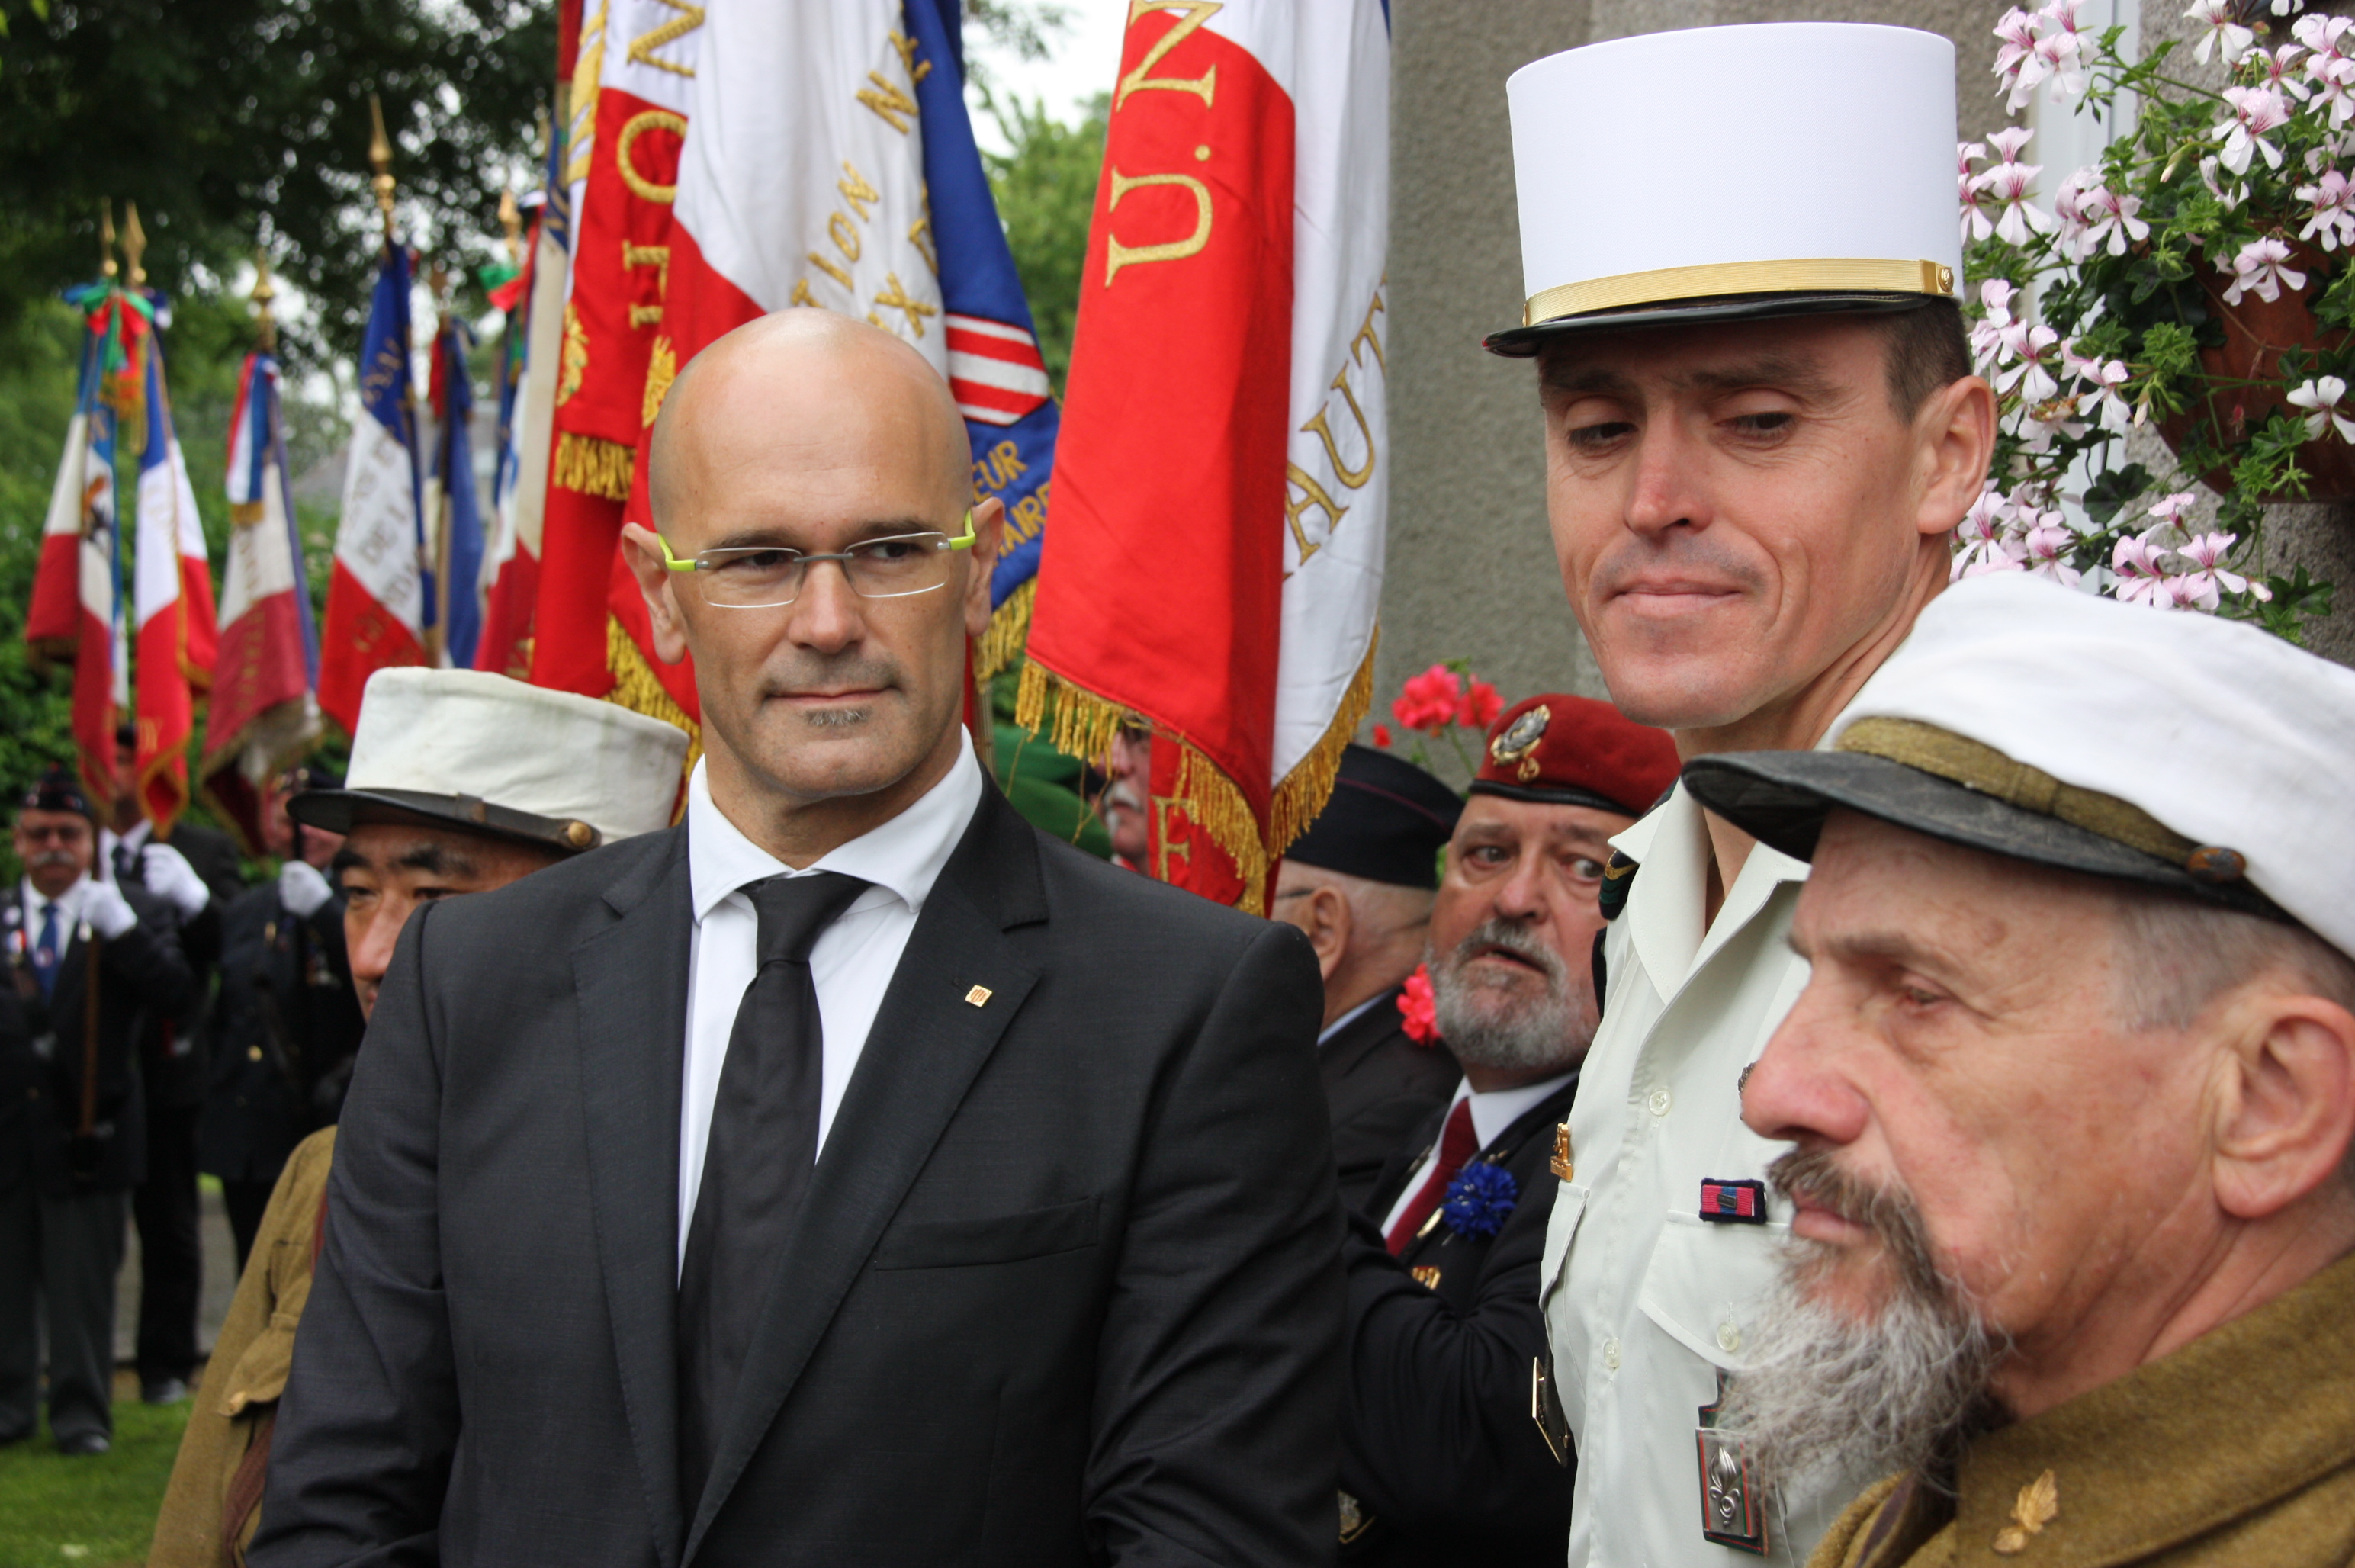 Catalan Minister for Foreign Affairs, Raül Romeva, with French soldiers and surrounded by flags, at the homage to the soldiers who fought with the French Foreign Legion in the battle of Belloy-en-Santerre, in 1916 (by ACN)